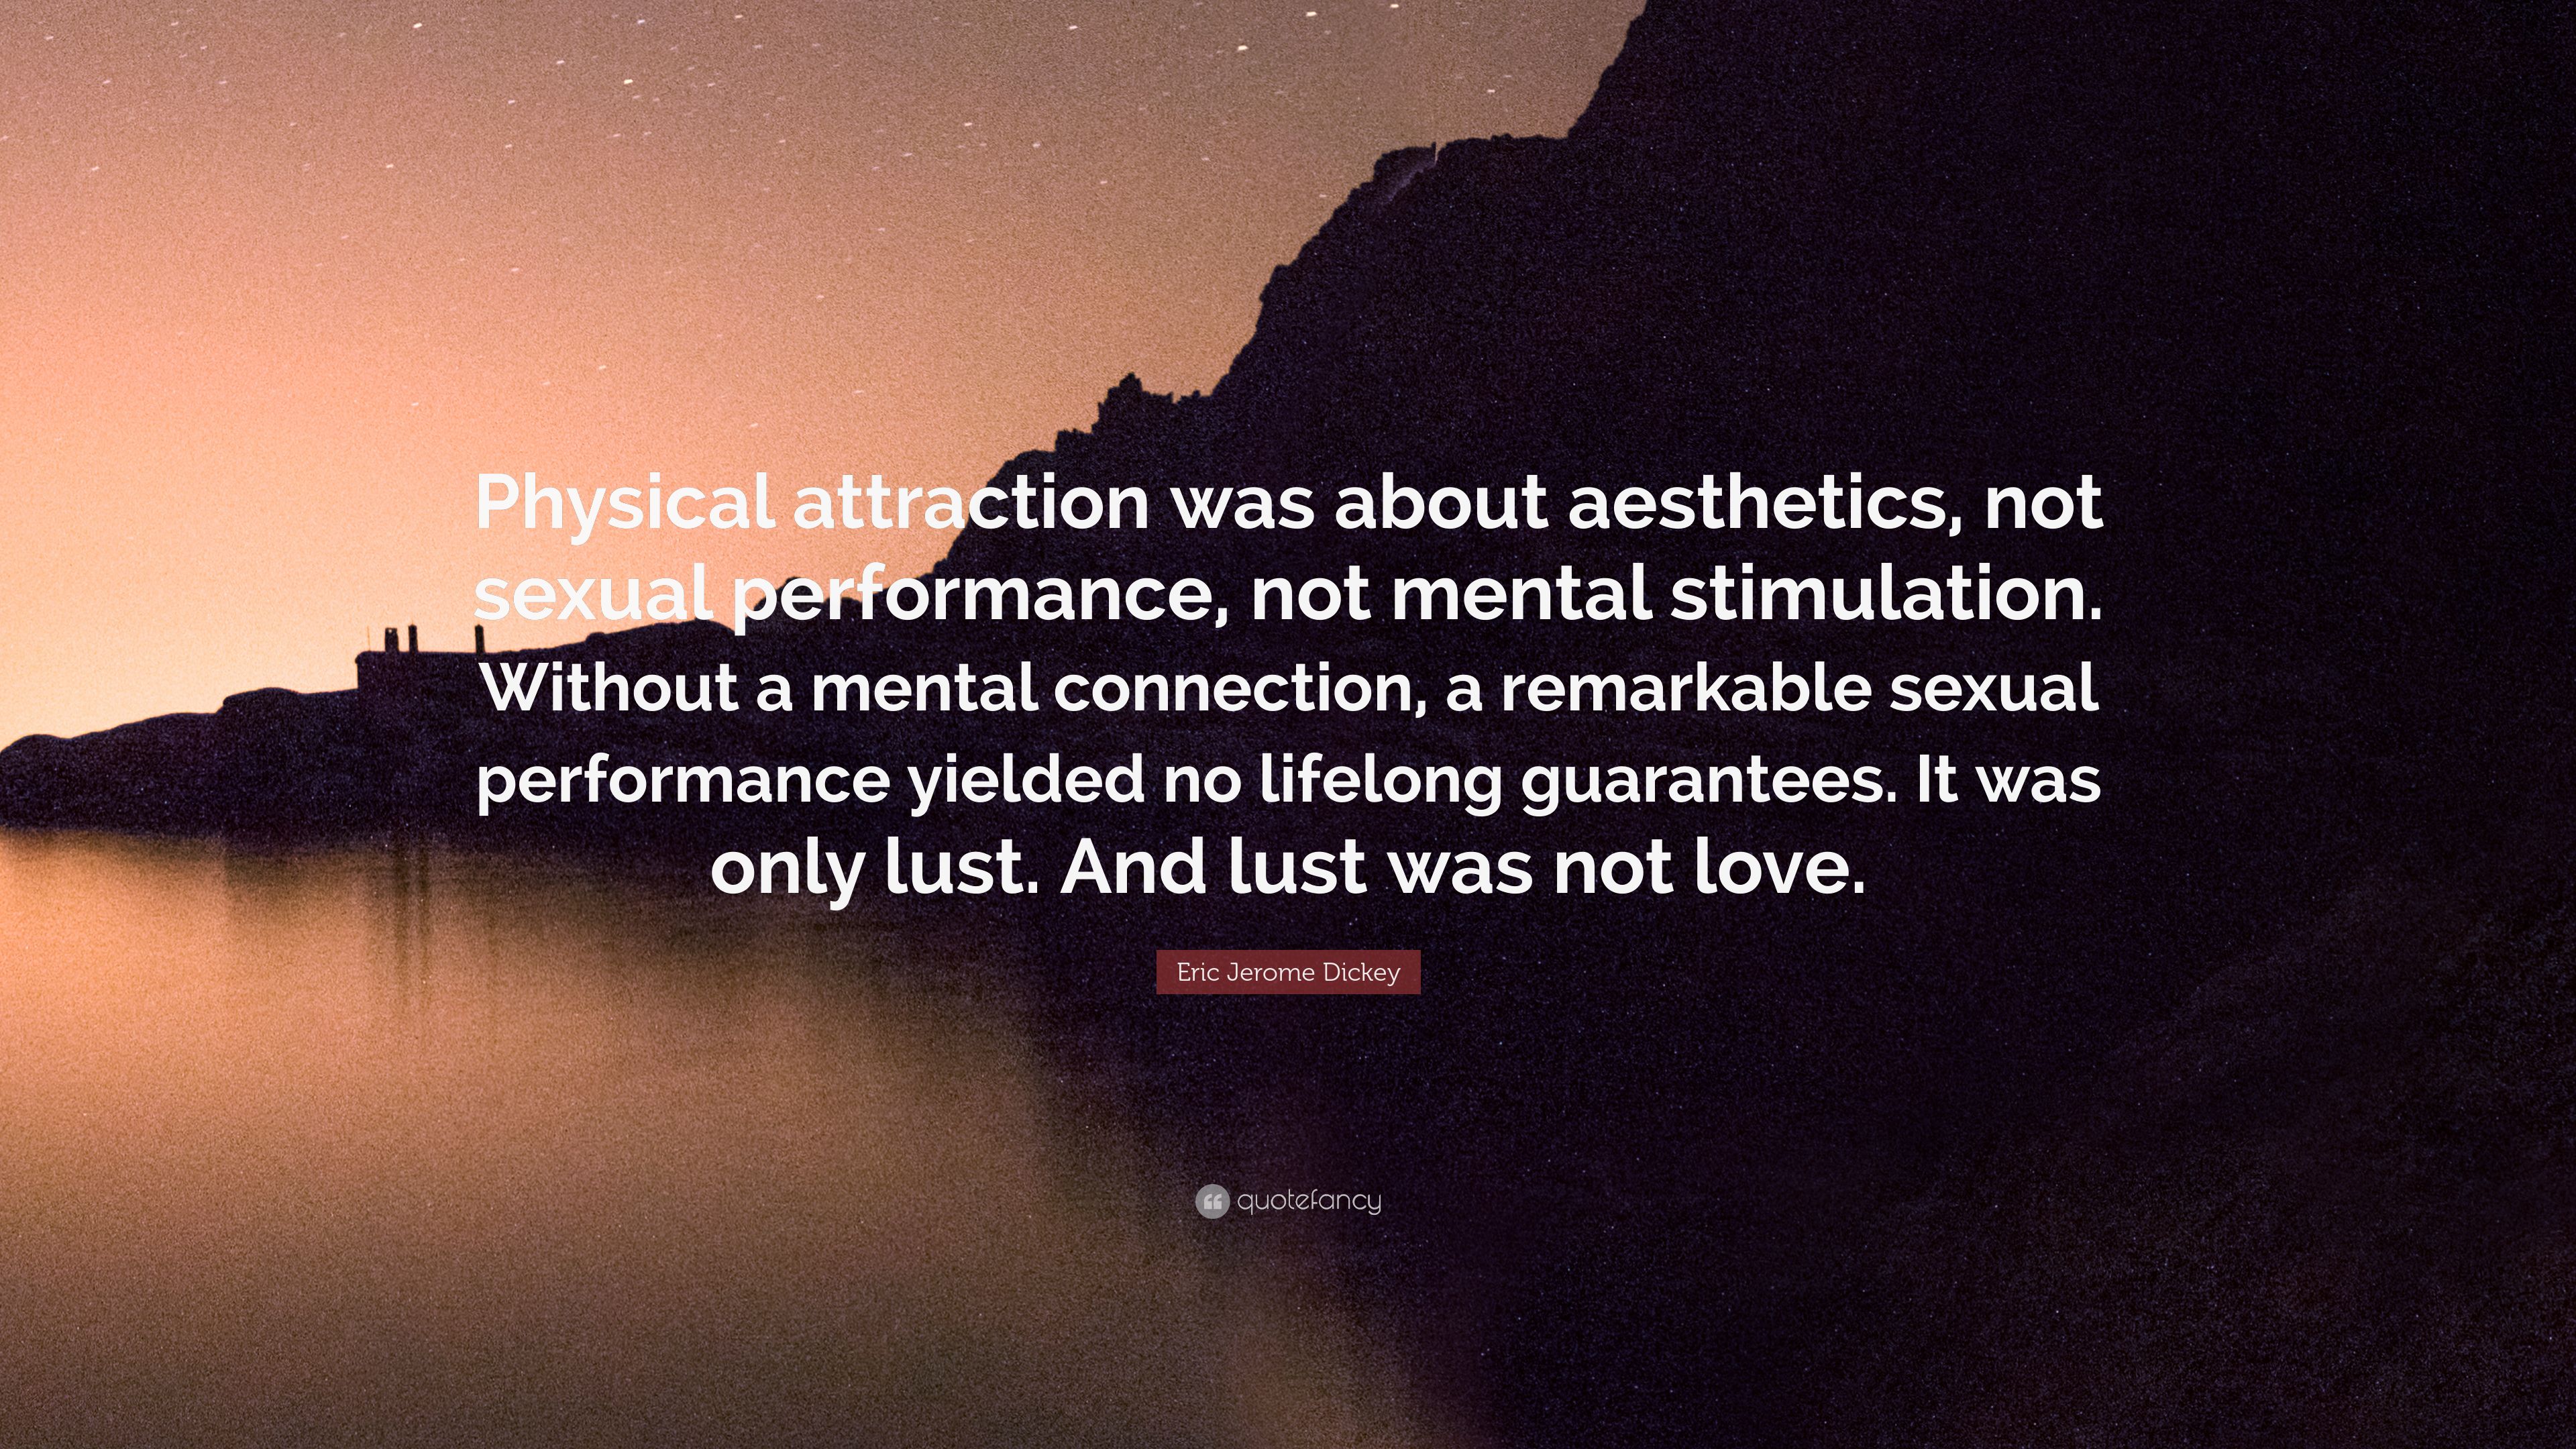 Eric Jerome Dickey Quote: “Physical attraction was about